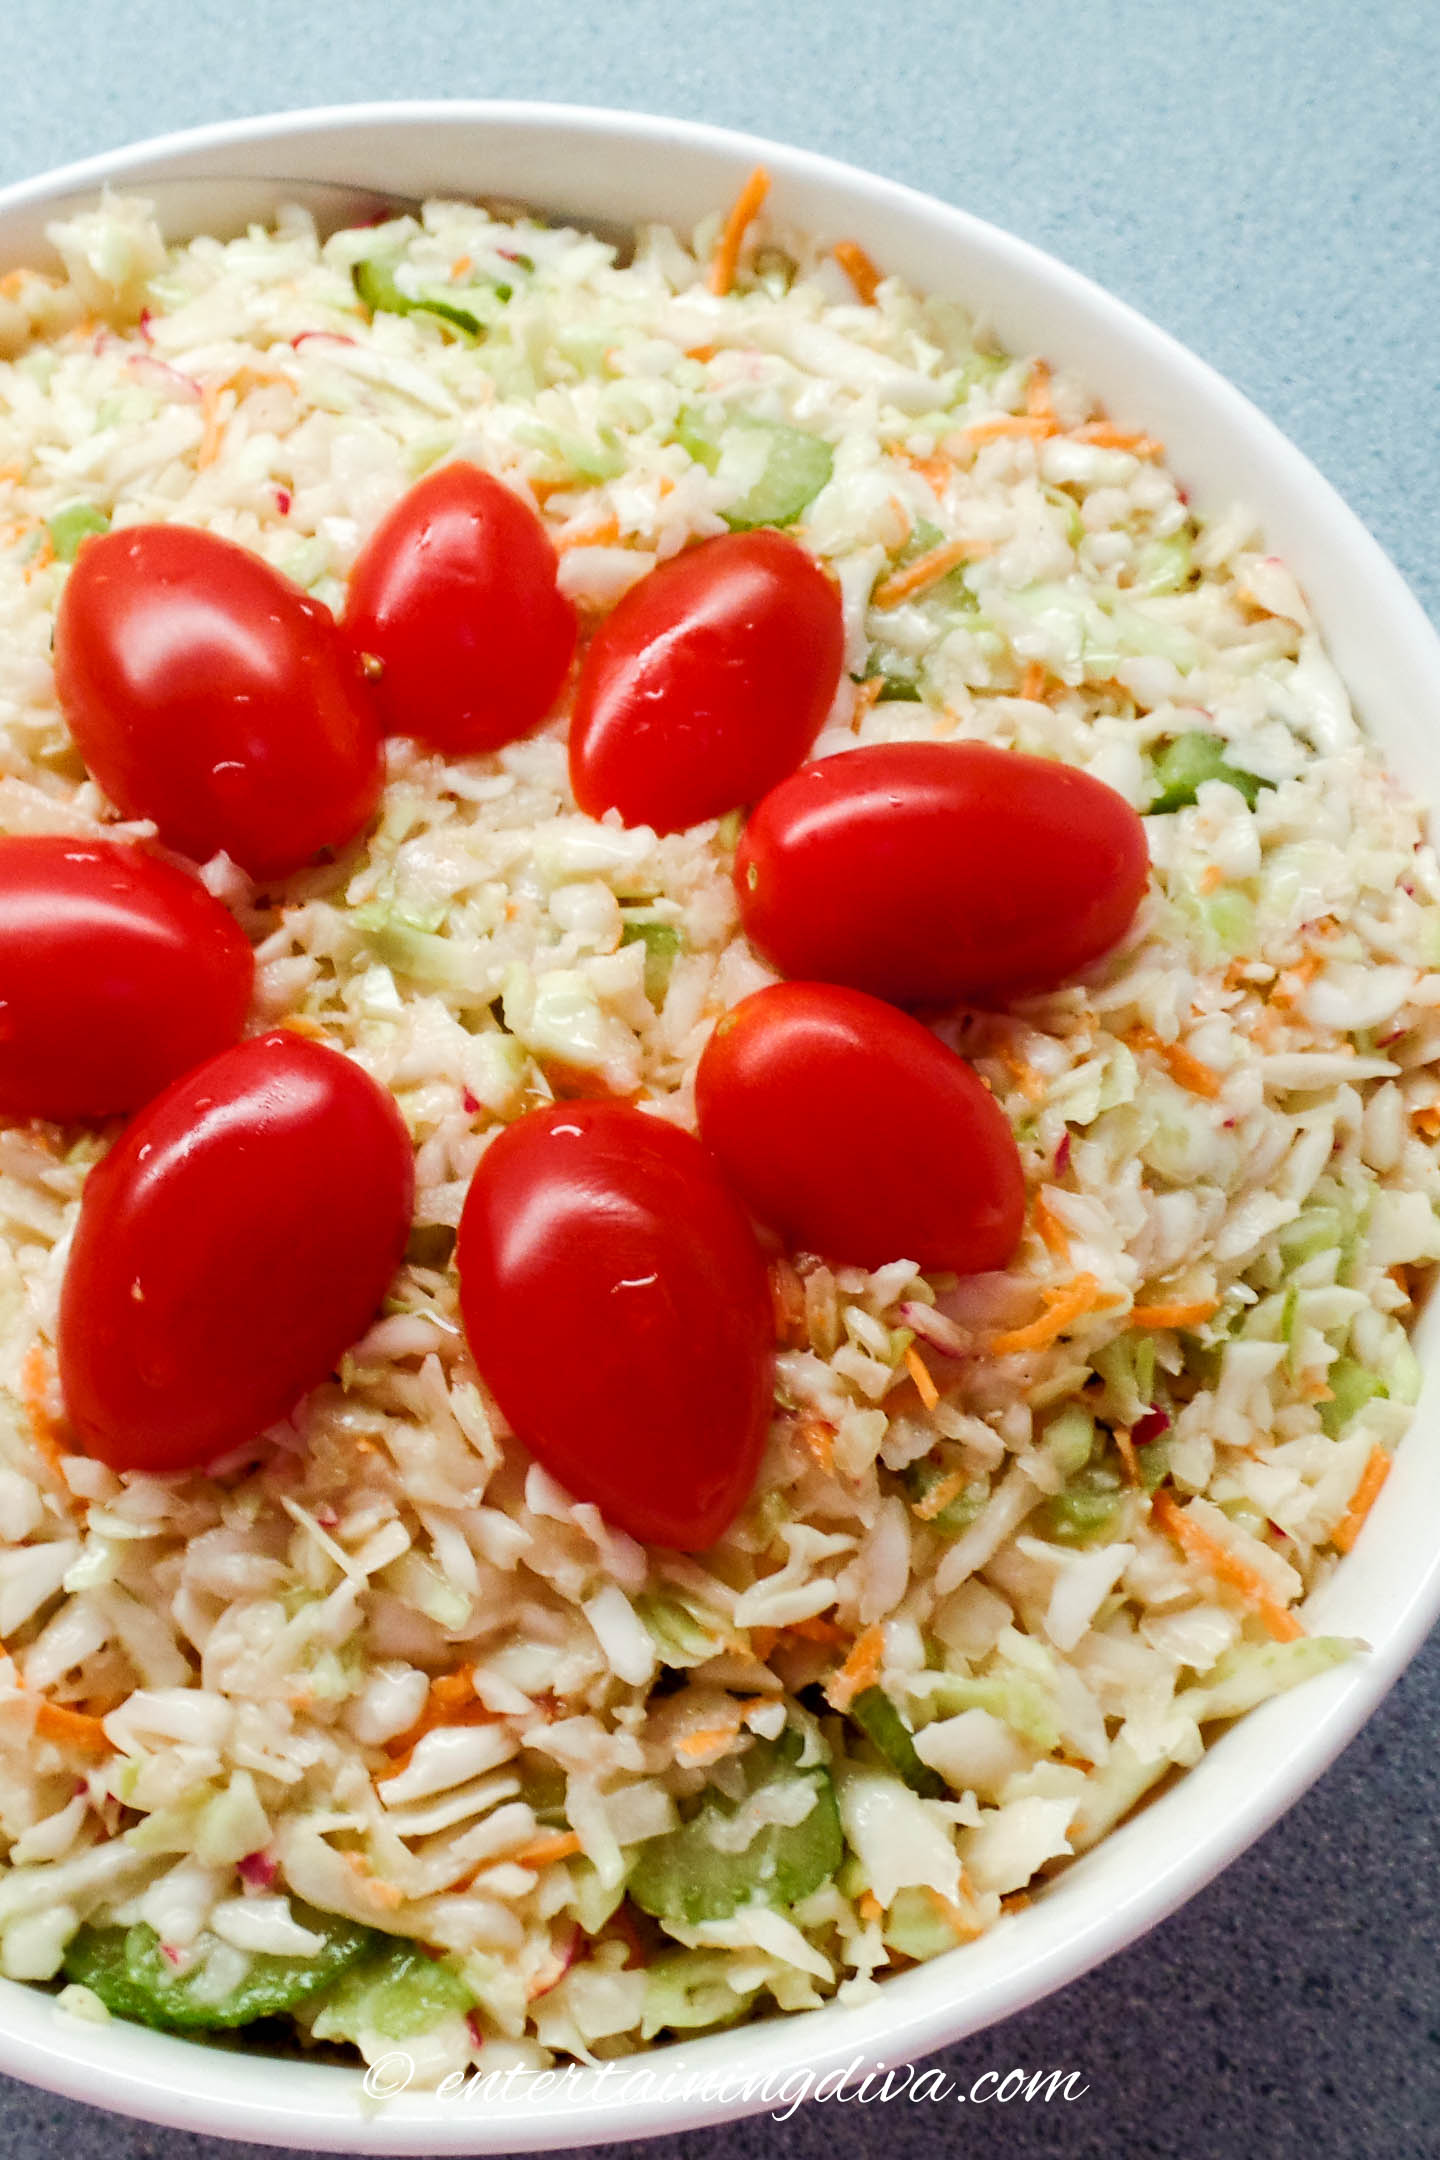 Top view of coleslaw recipe in white bowl with tomatoes